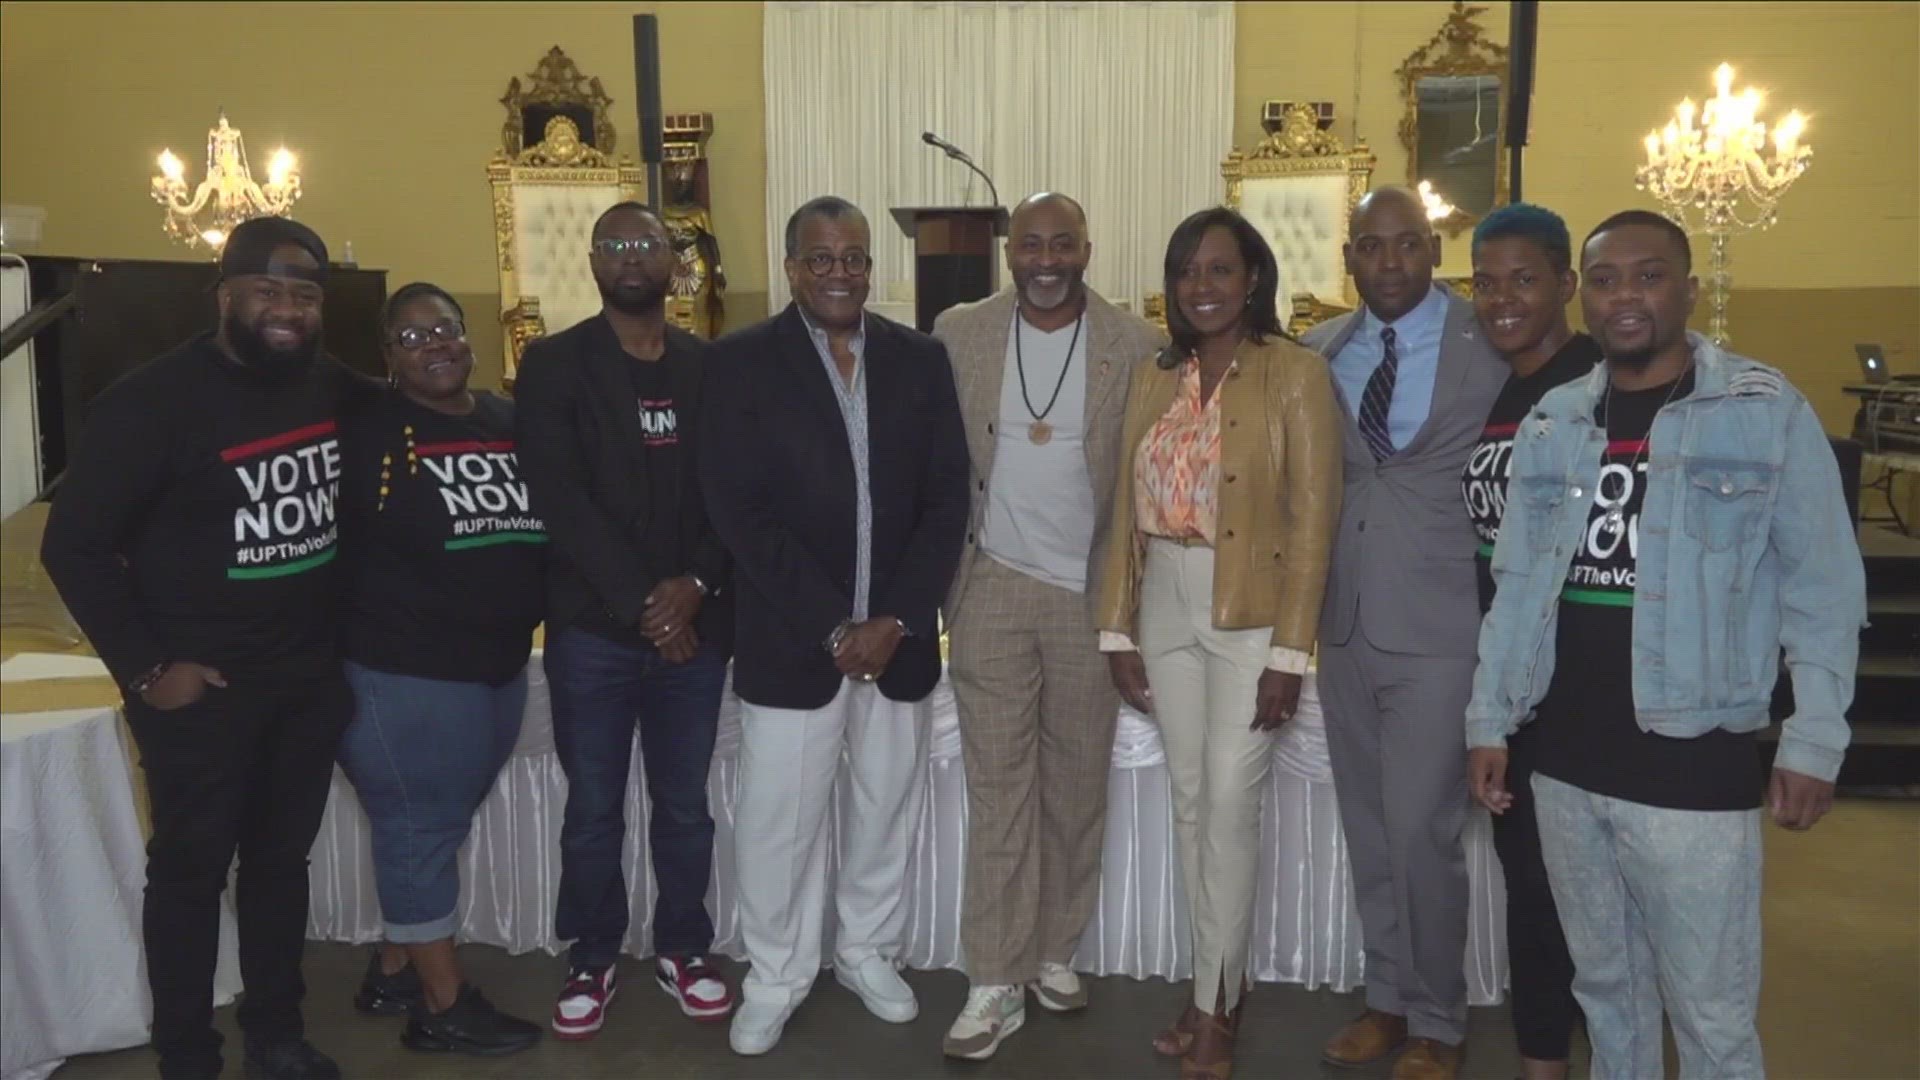 Five candidates attended the third installment of a mayoral "Meet and Greet" series. Affordable housing, public safety and fighting blight were topics discussed.